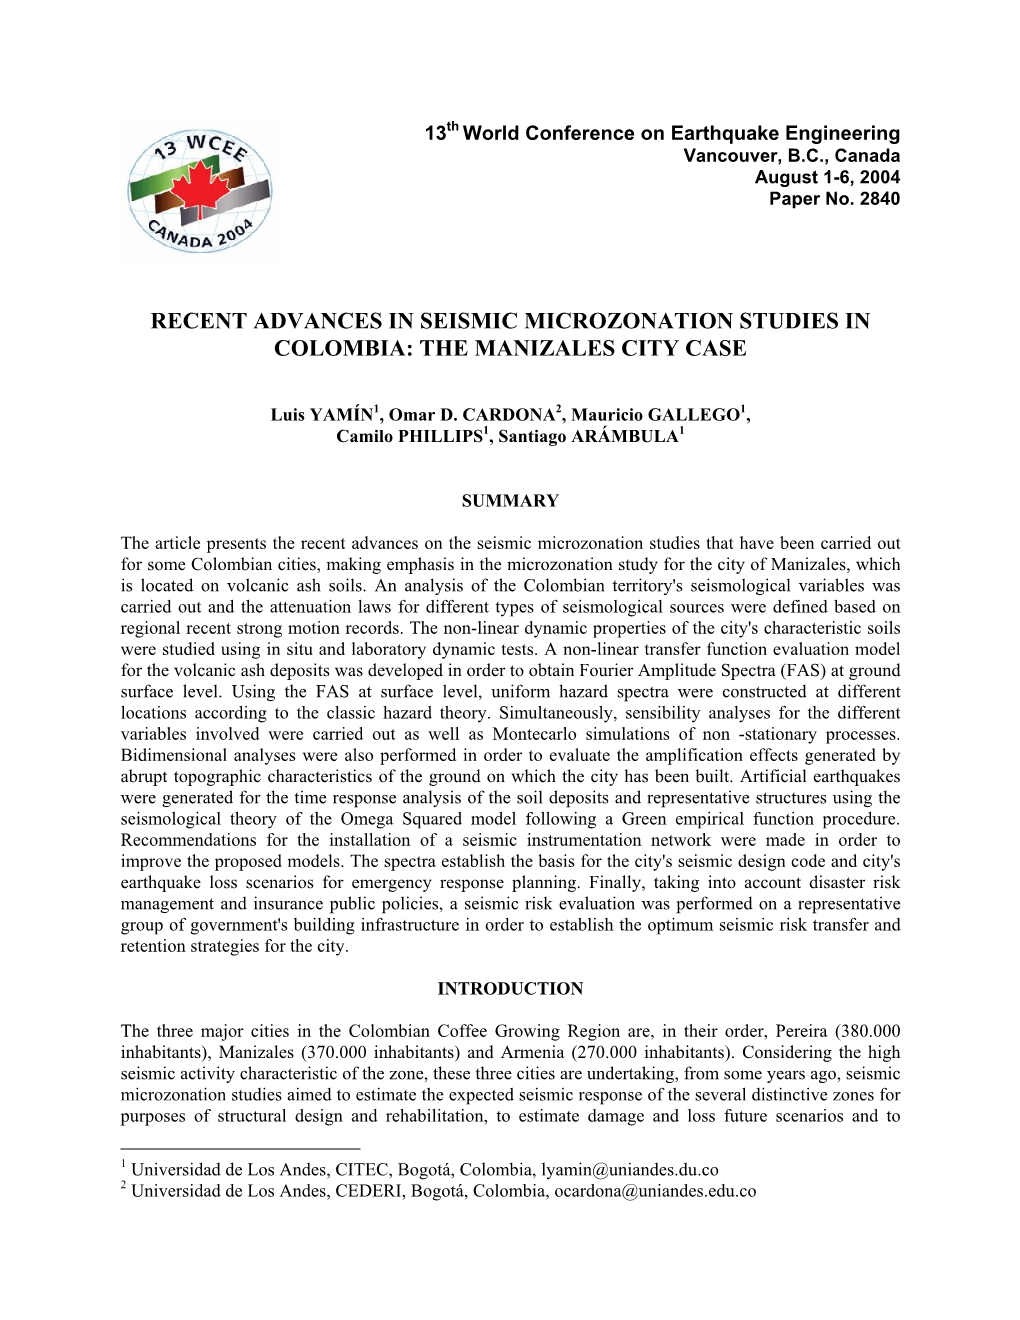 Recent Advances in Seismic Microzonation Studies in Colombia: the Manizales City Case